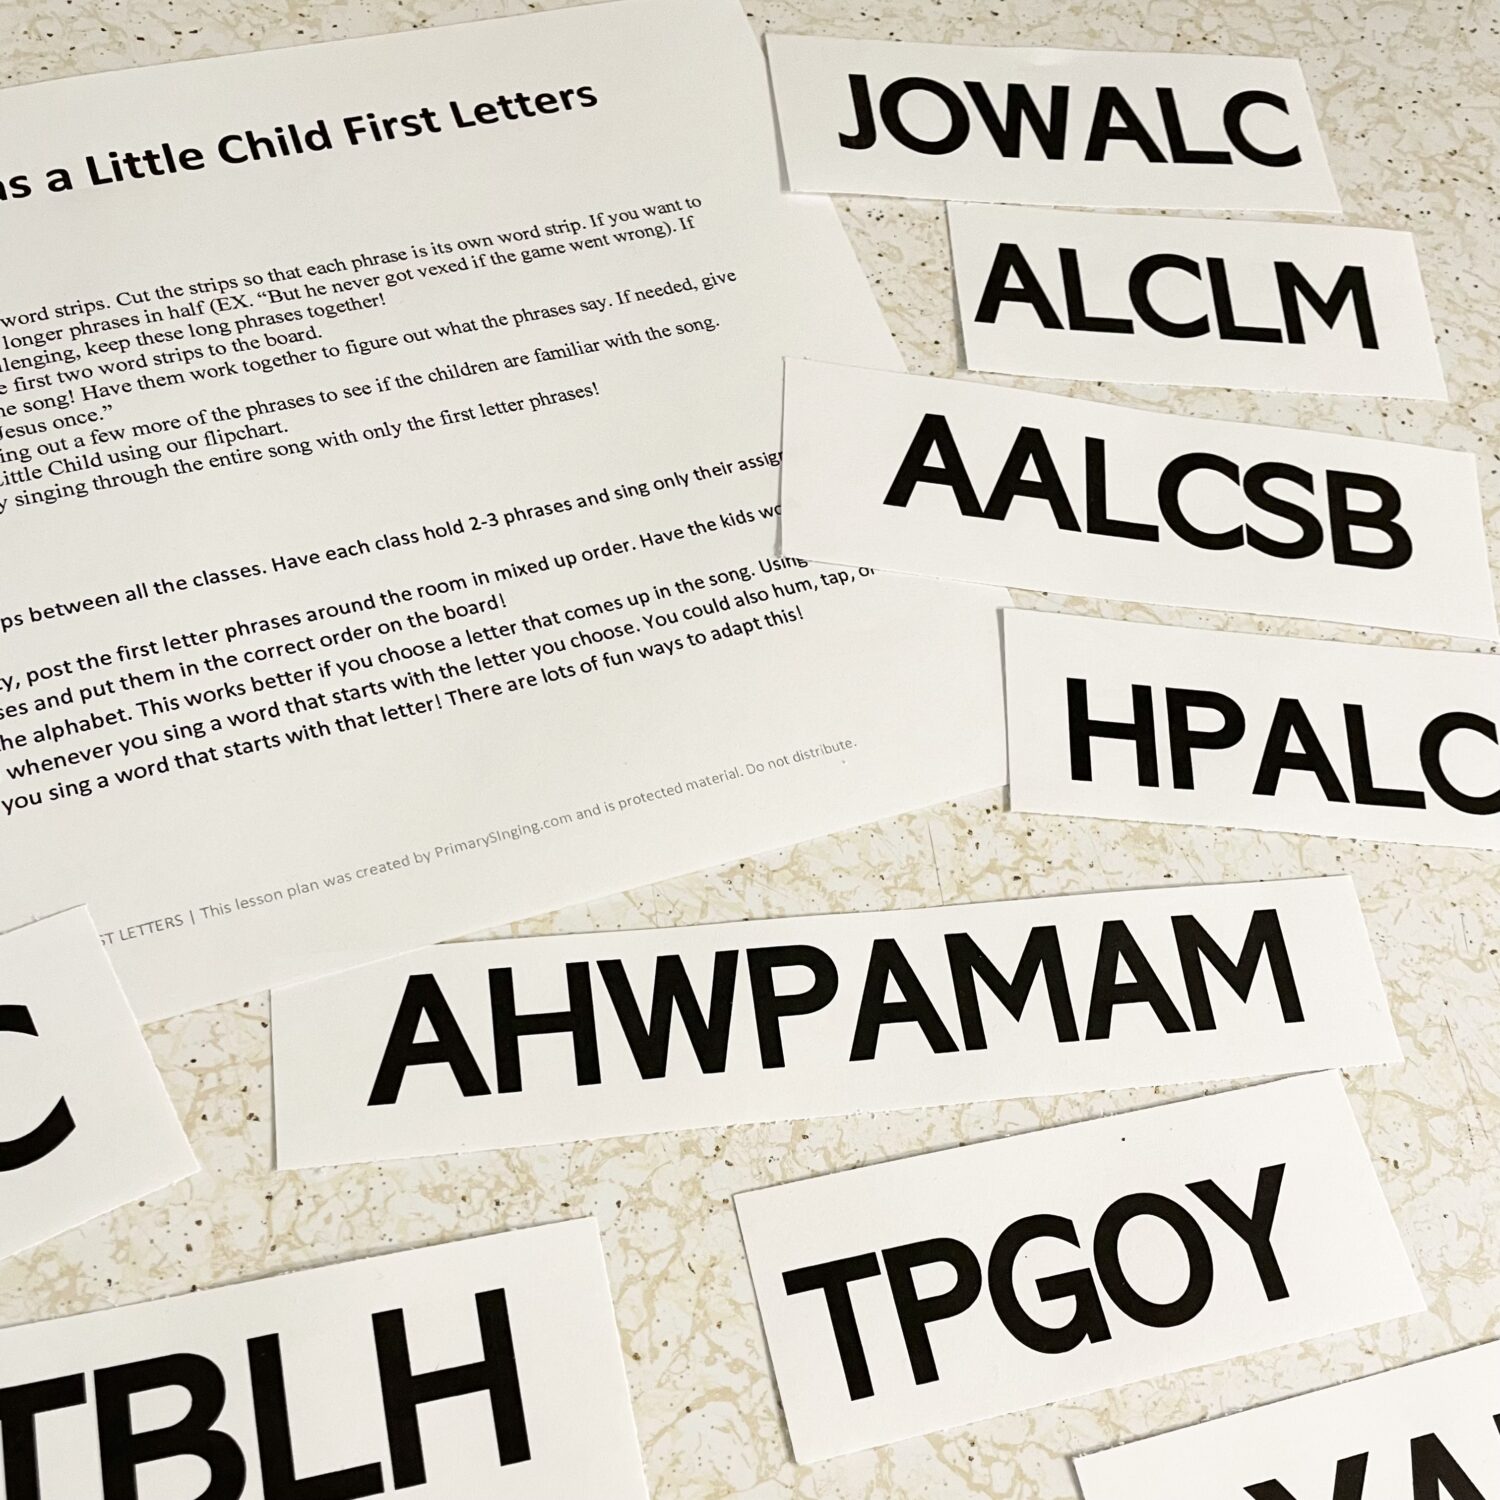 Jesus Once Was a Little Child First Letters logical activity for LDS Primary Music Leaders teaching Come Follow Me New Testament.